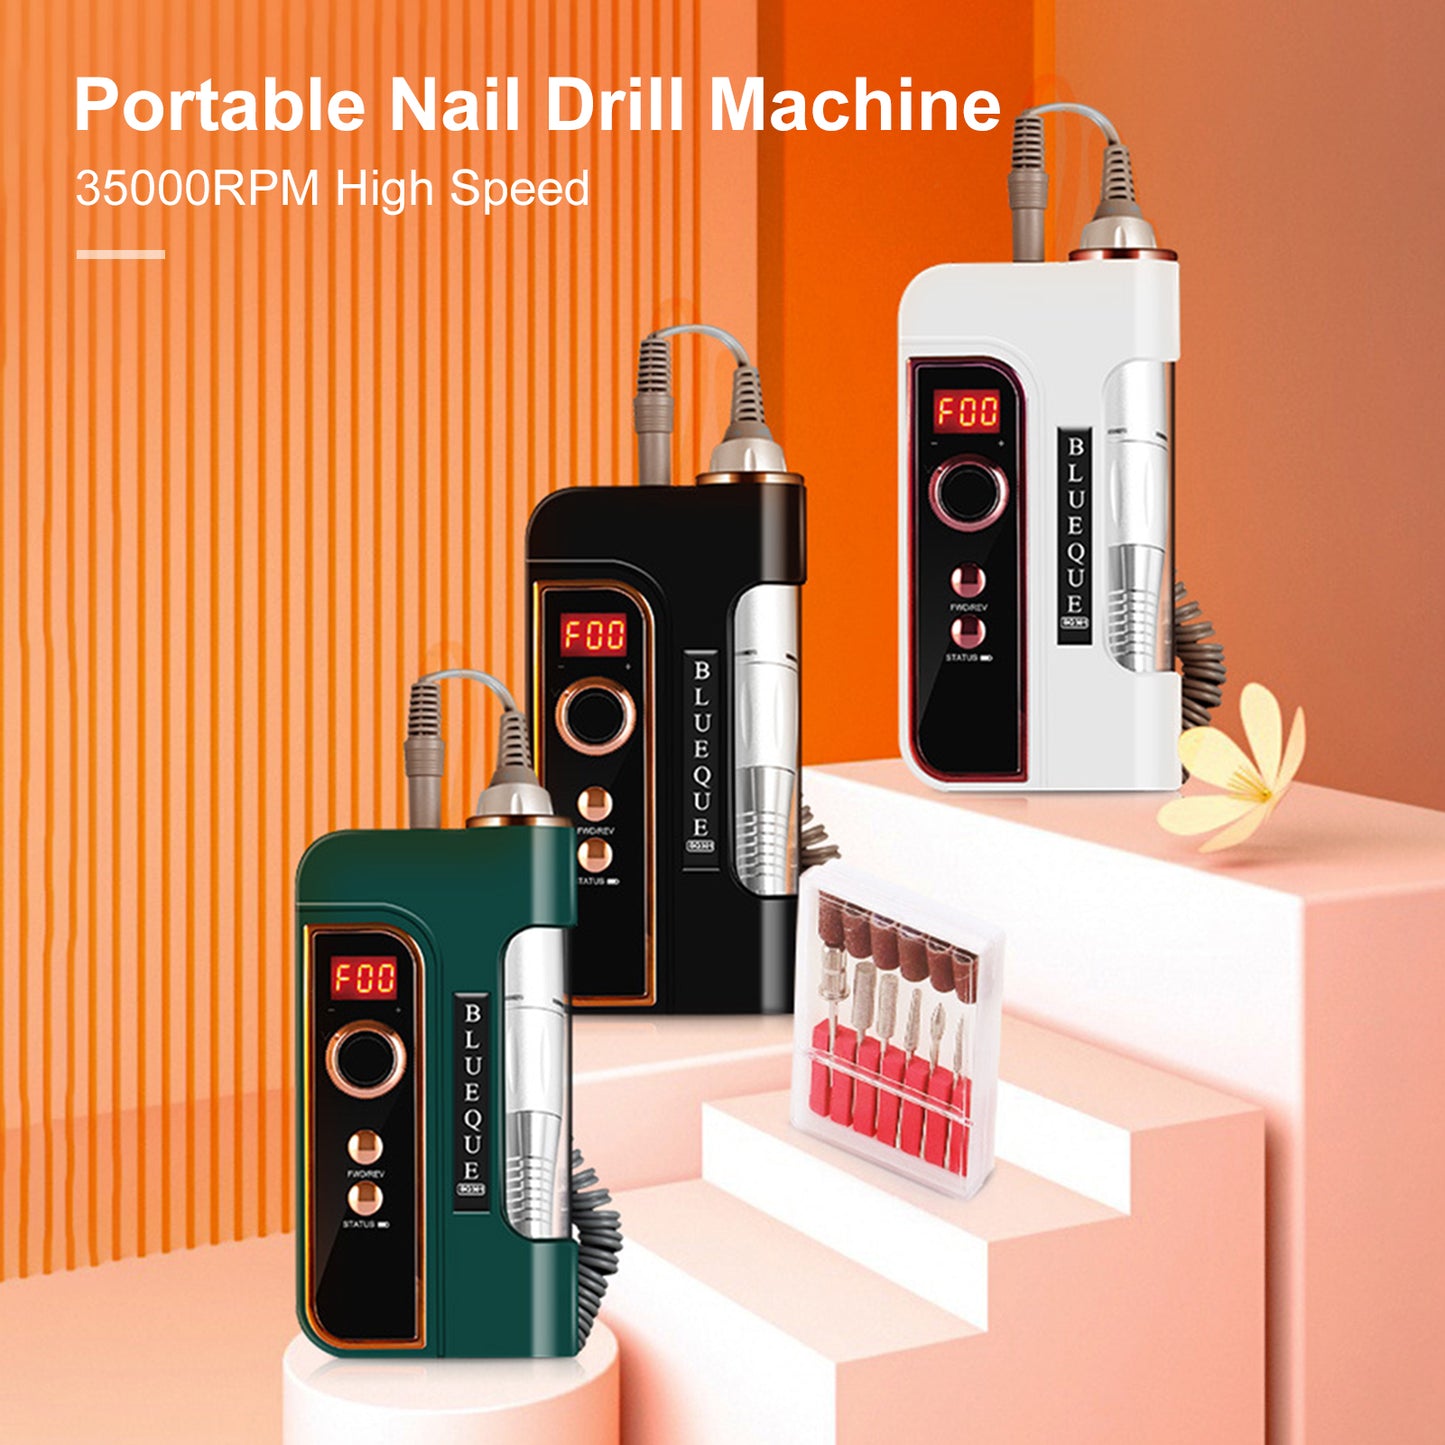 Nail Drill Machine 35000RPM Mini Rechargeable Electric Nail Polishing Tool Kit with Interchangeable Grinding Bits Nail Art Tool